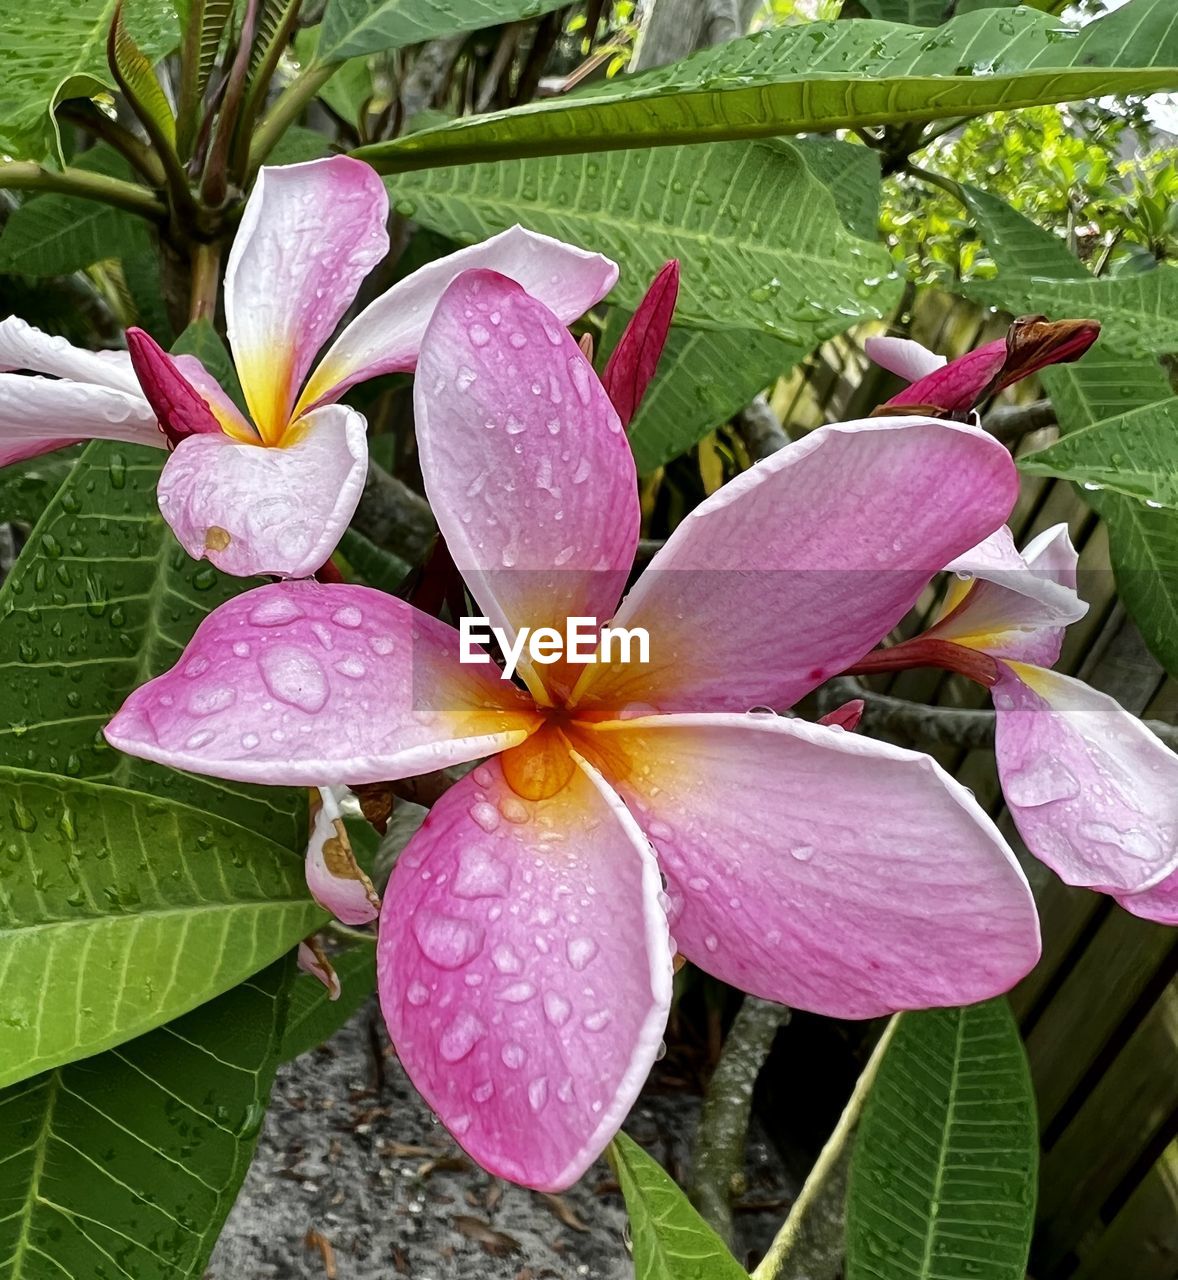 plant, flower, flowering plant, leaf, beauty in nature, freshness, plant part, growth, petal, fragility, close-up, nature, drop, inflorescence, flower head, water, pink, wet, frangipani, no people, day, outdoors, pollen, botany, rain, blossom, green